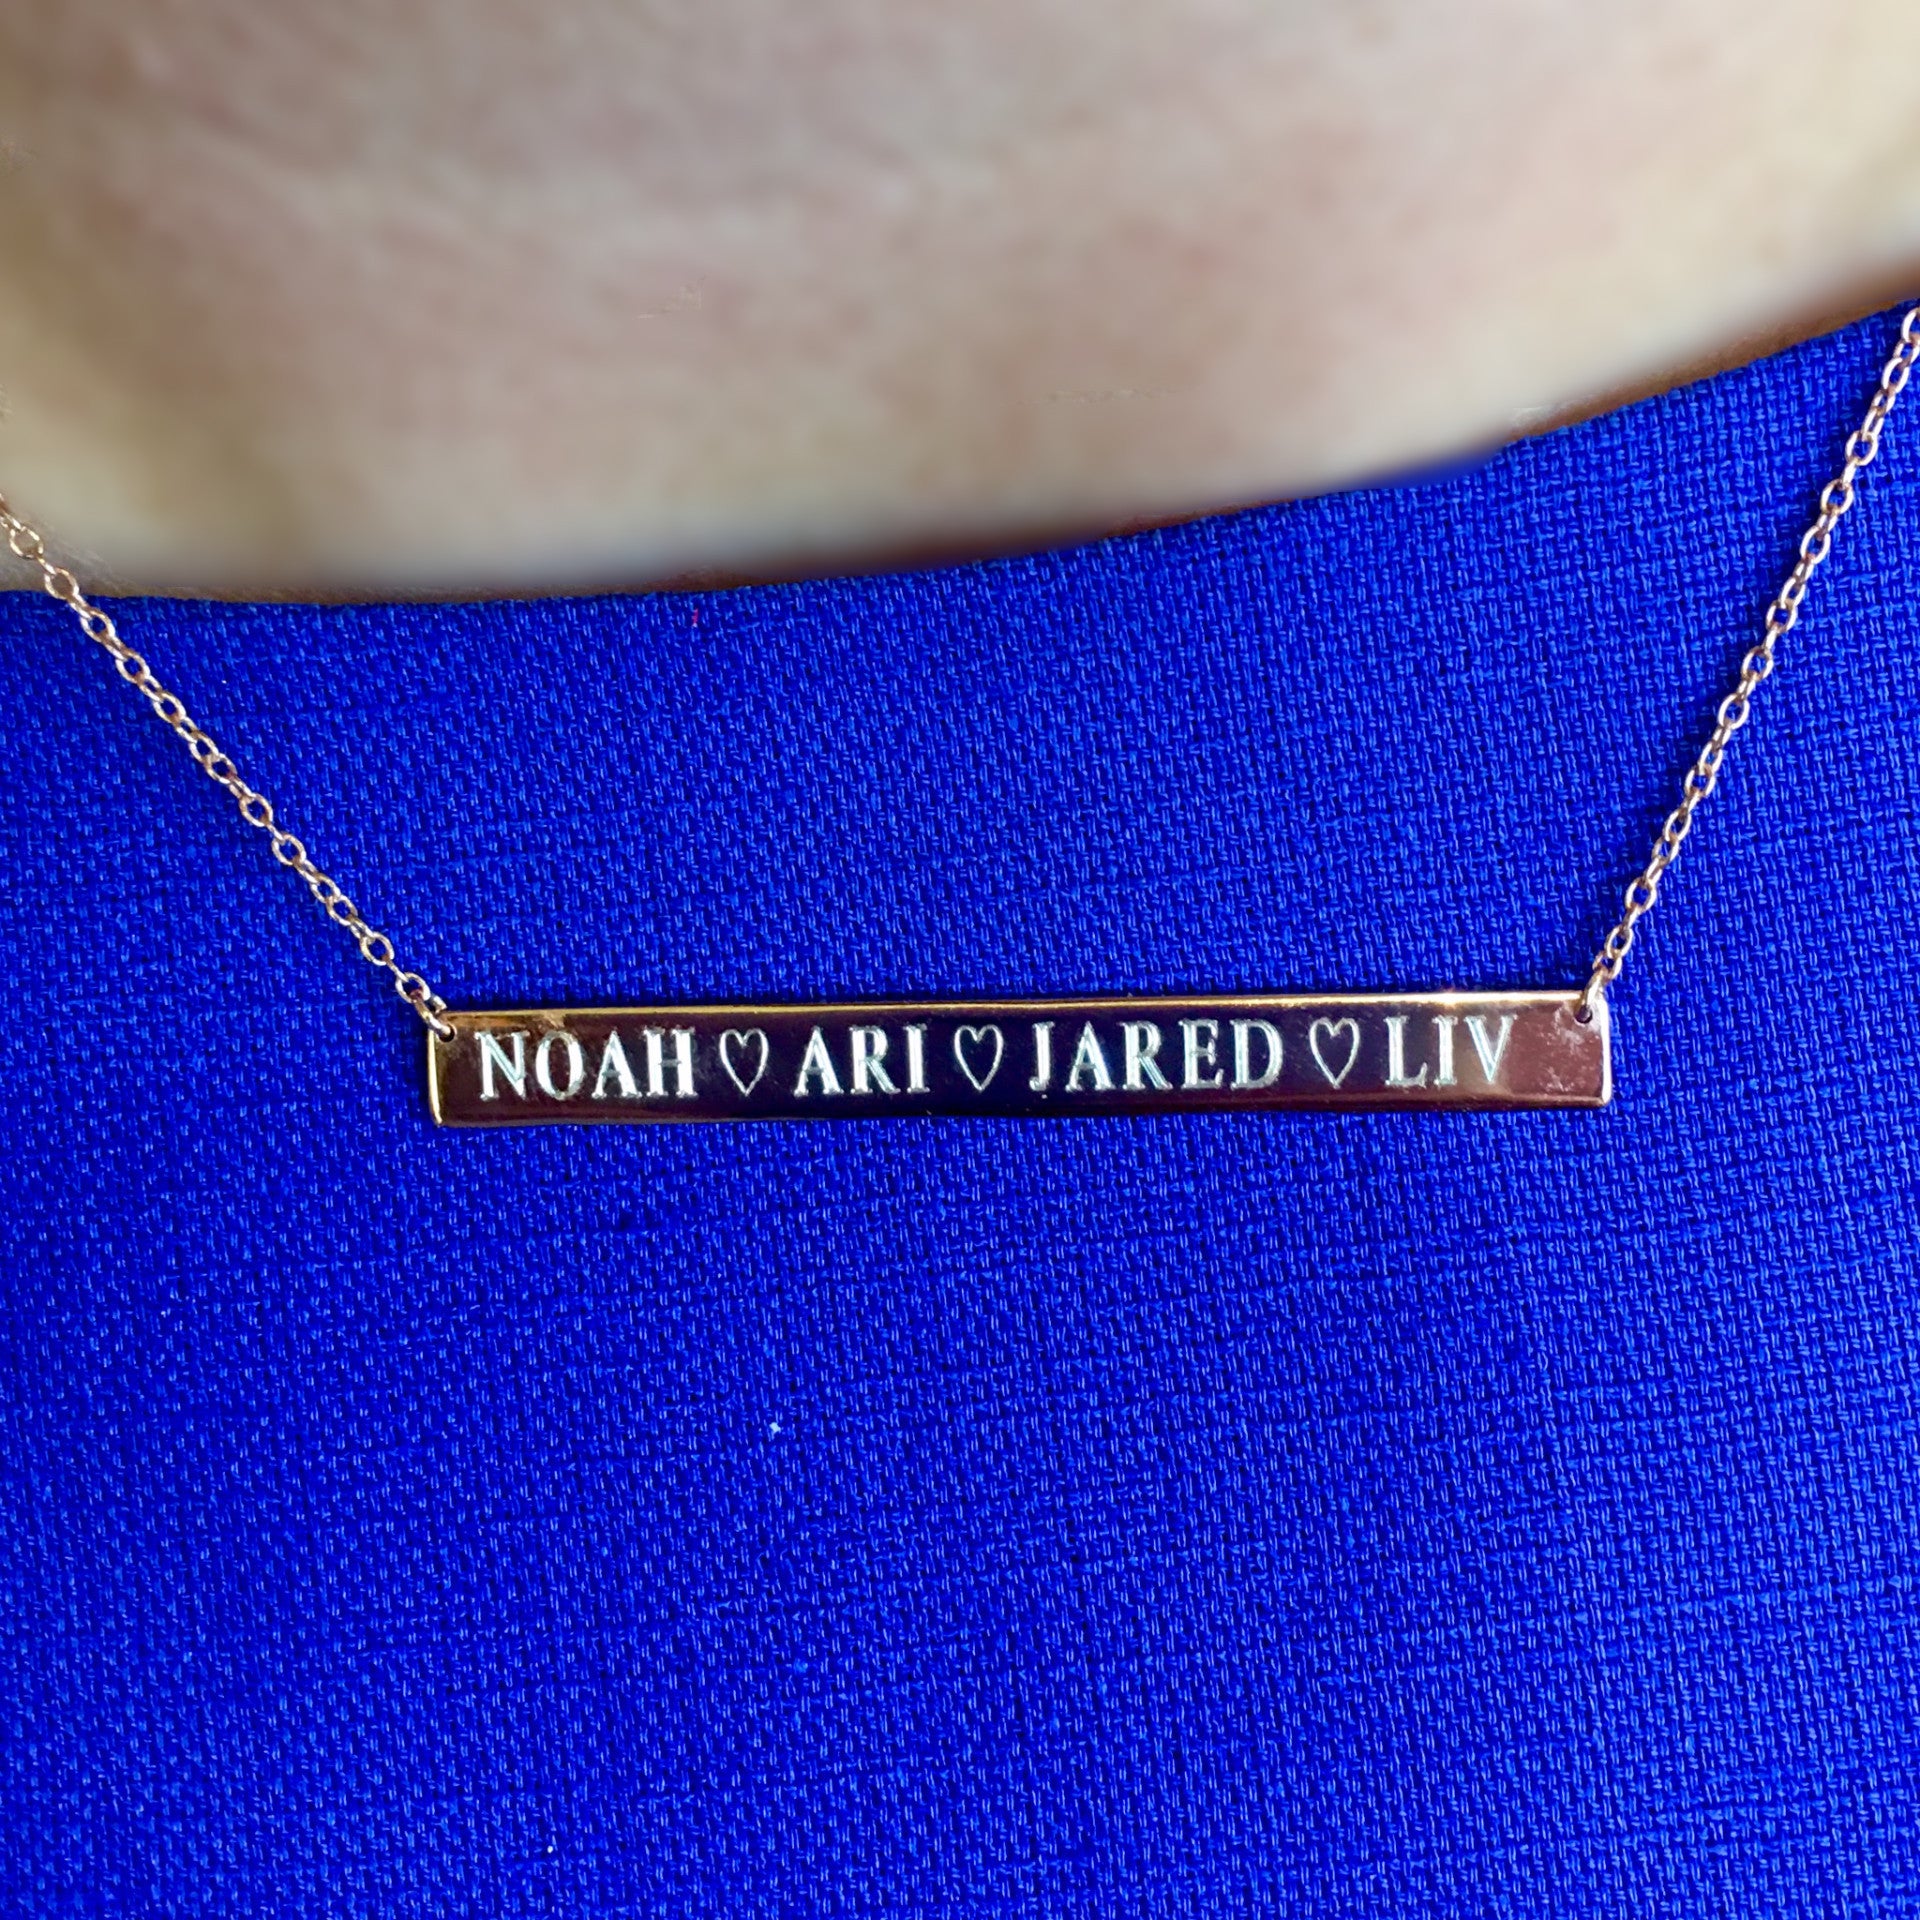 Large Bar Engraved Nameplate Necklace - Retail Therapy Jewelry